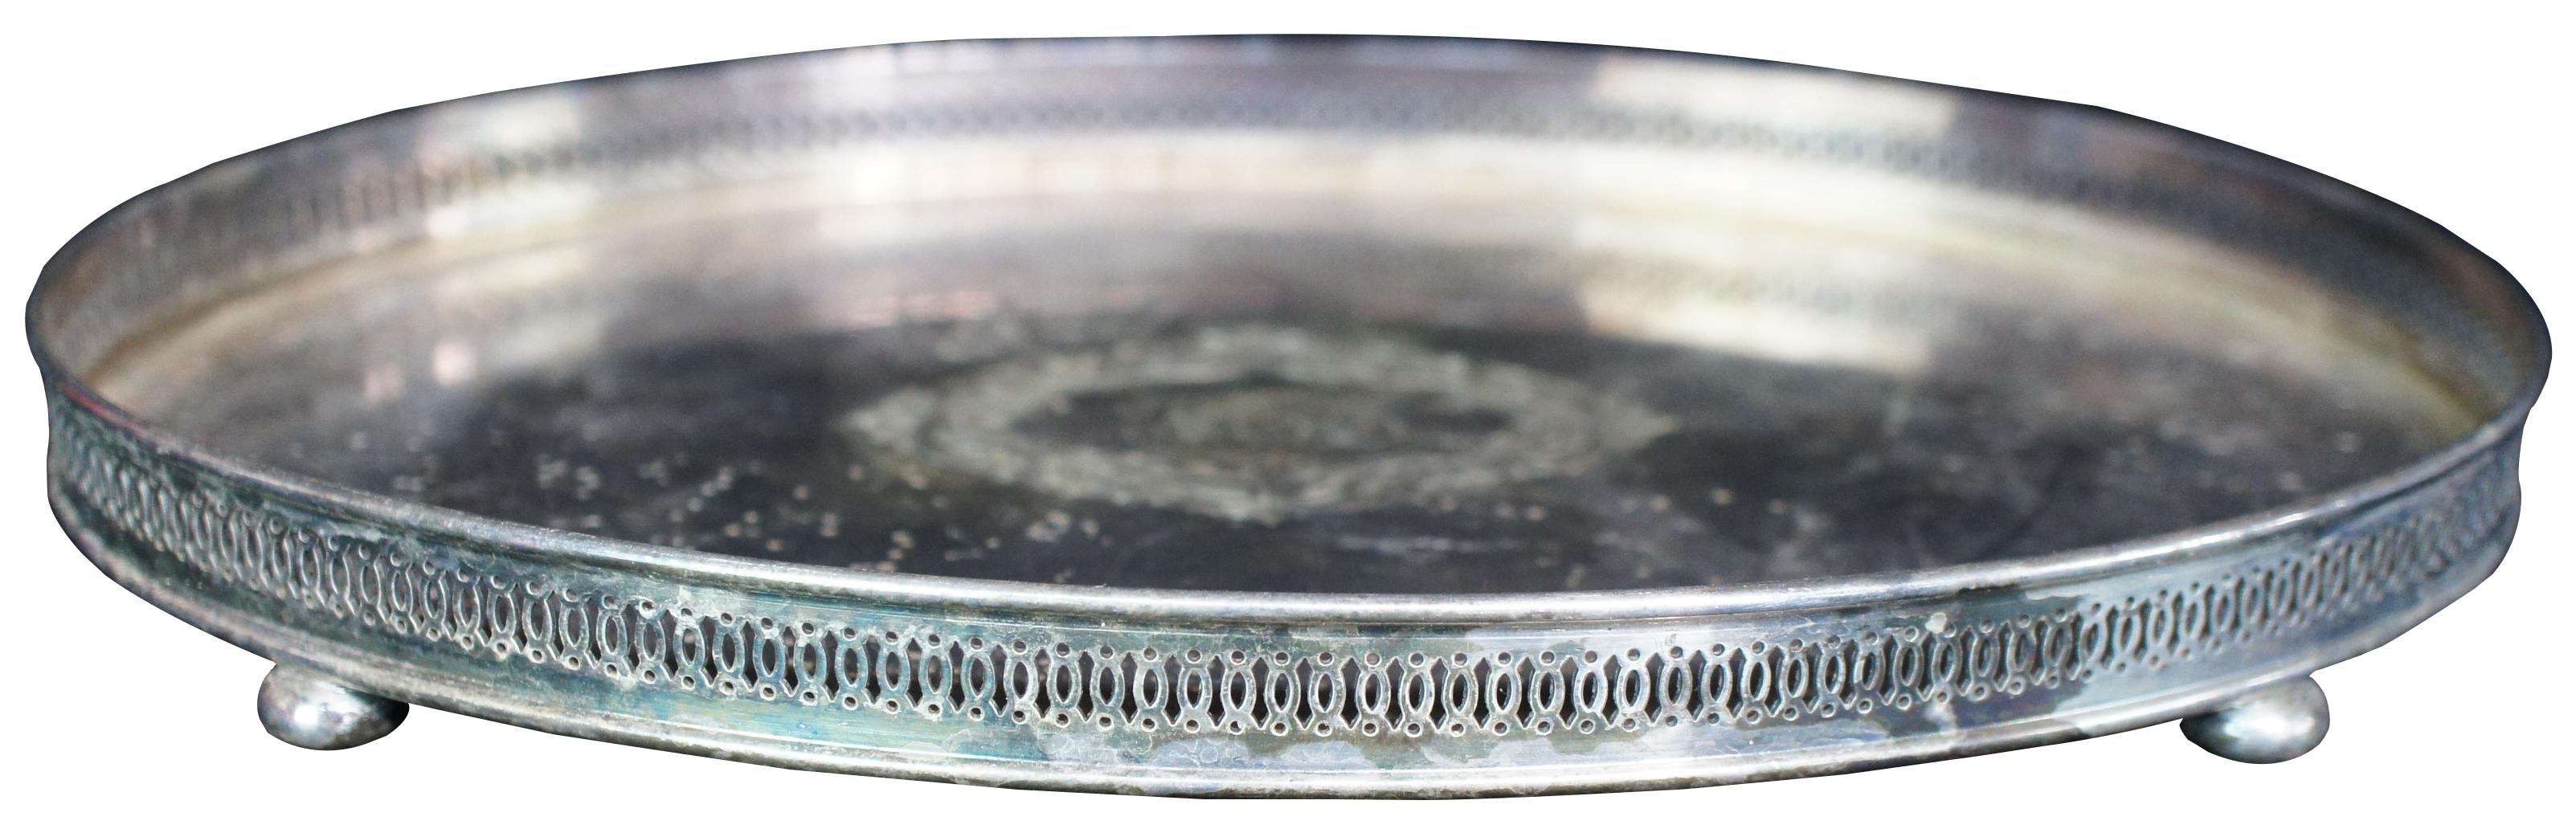 Antique Gorham silver plated tray featuring oval form with pierced / reticulated gallery and footed base. Y1080. Measure: 9